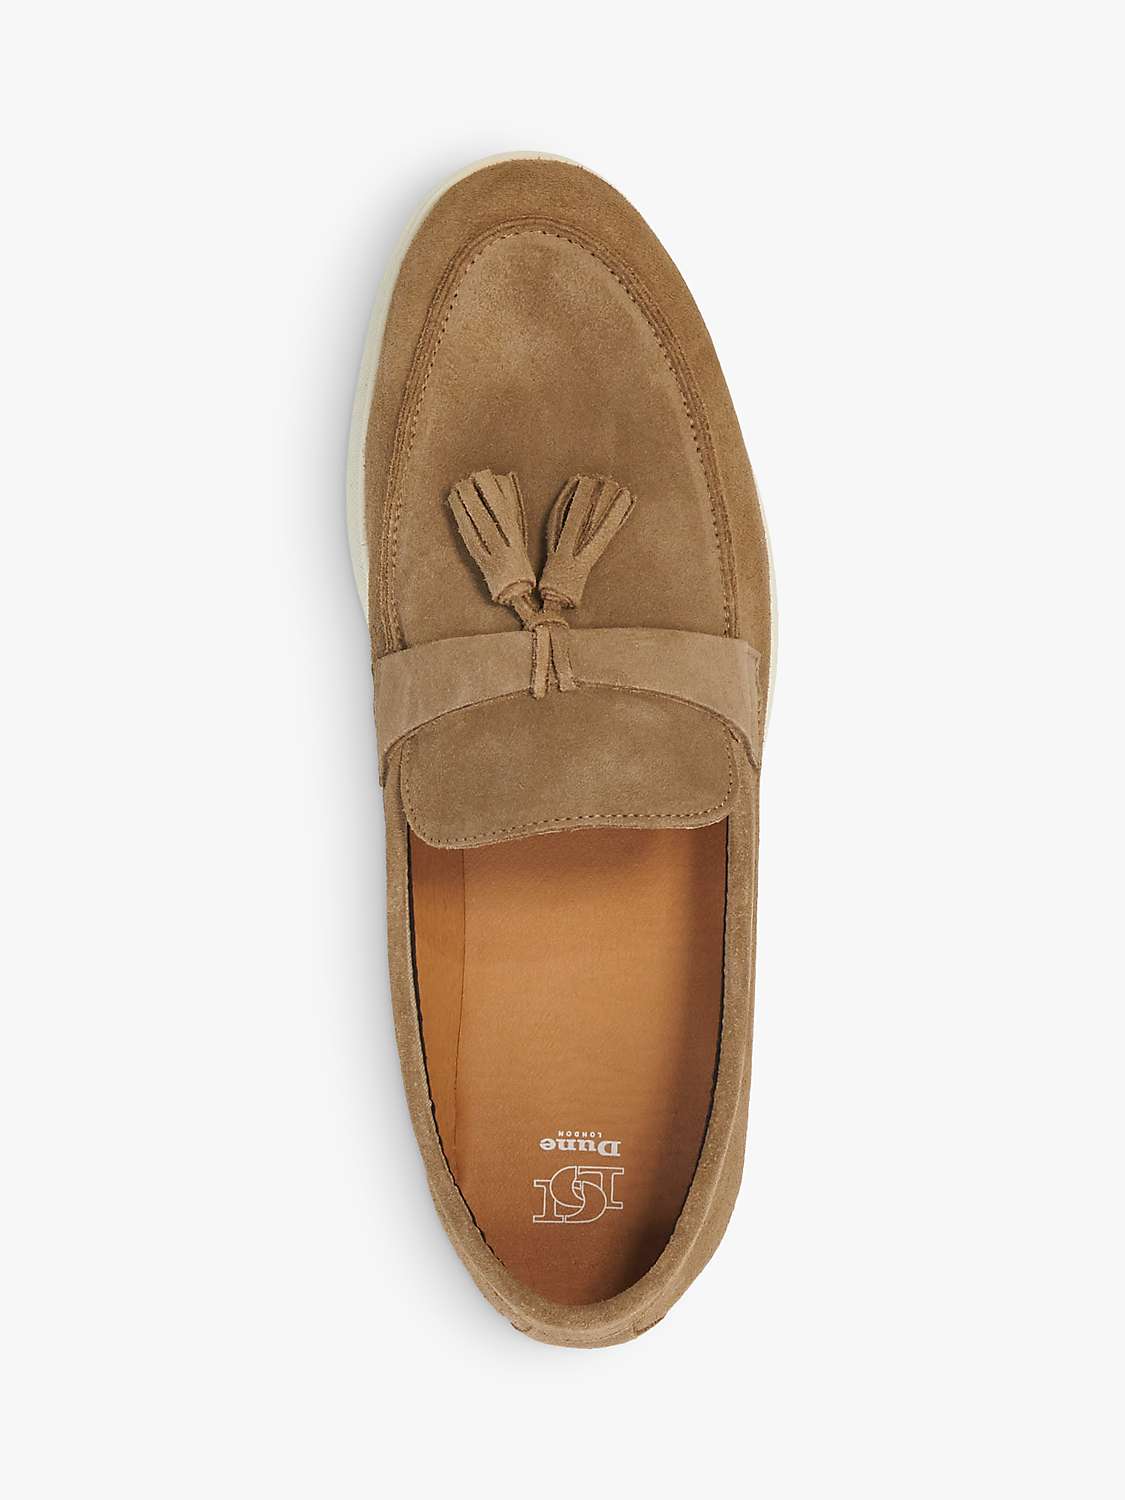 Buy Dune Believes Top Stitch Tassle Loafers, Taupe Online at johnlewis.com